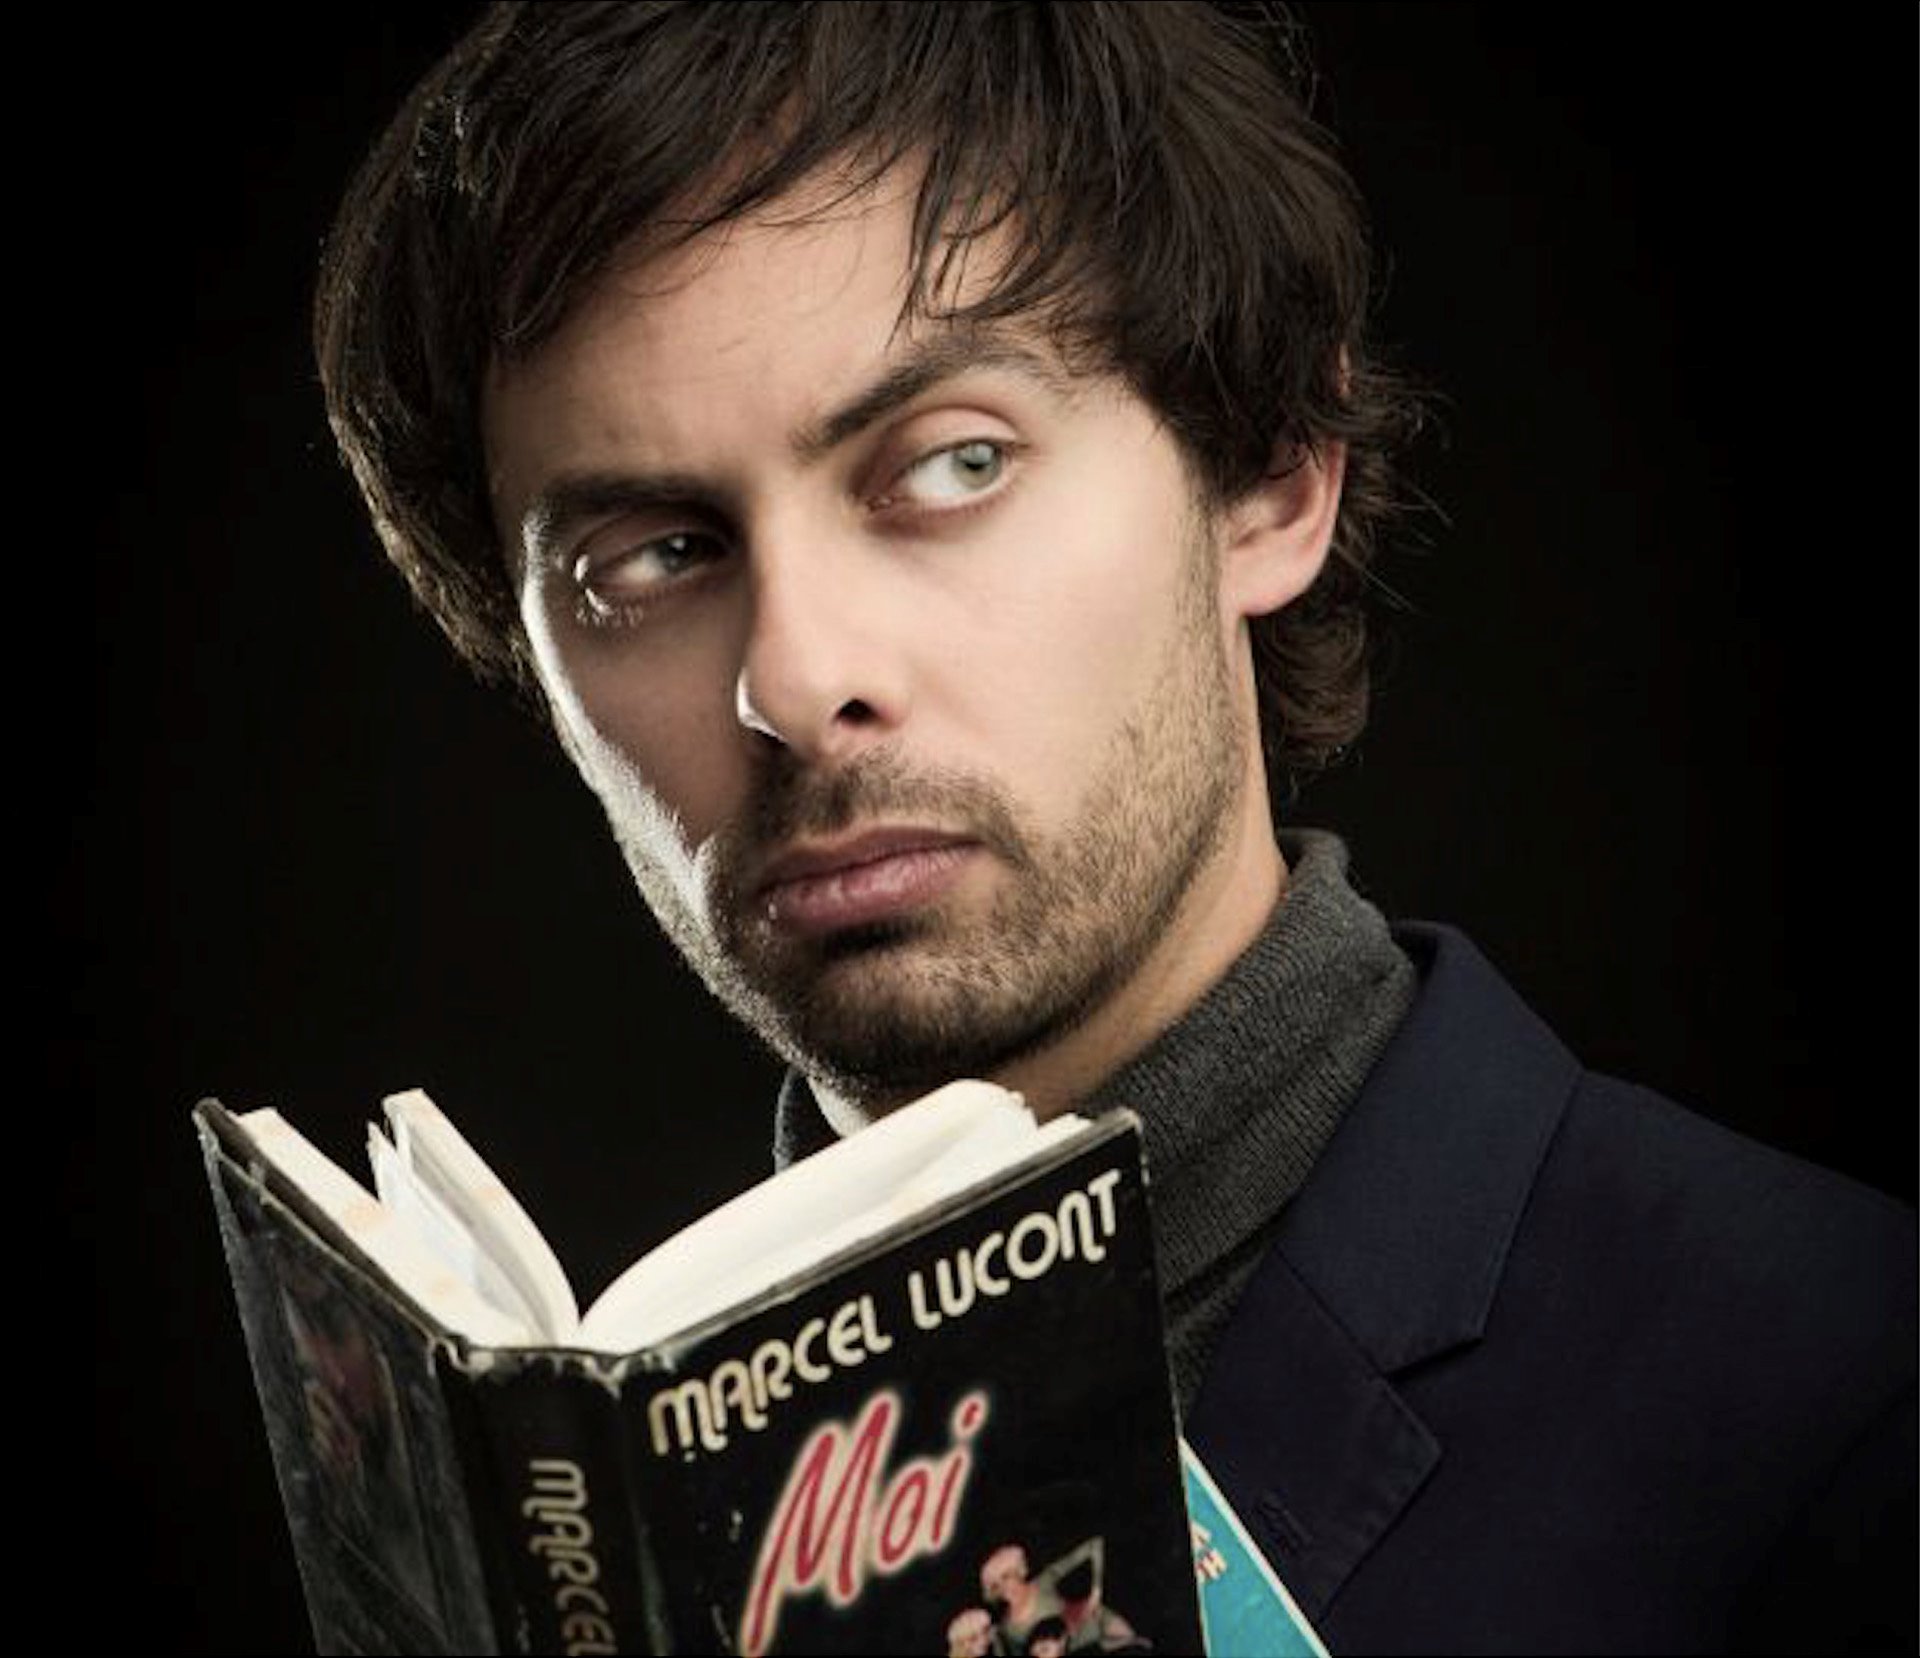 French comedian Marcel Lucont peers over the top of a book with his name on the cover for a cabaret dinner show in the cotswolds